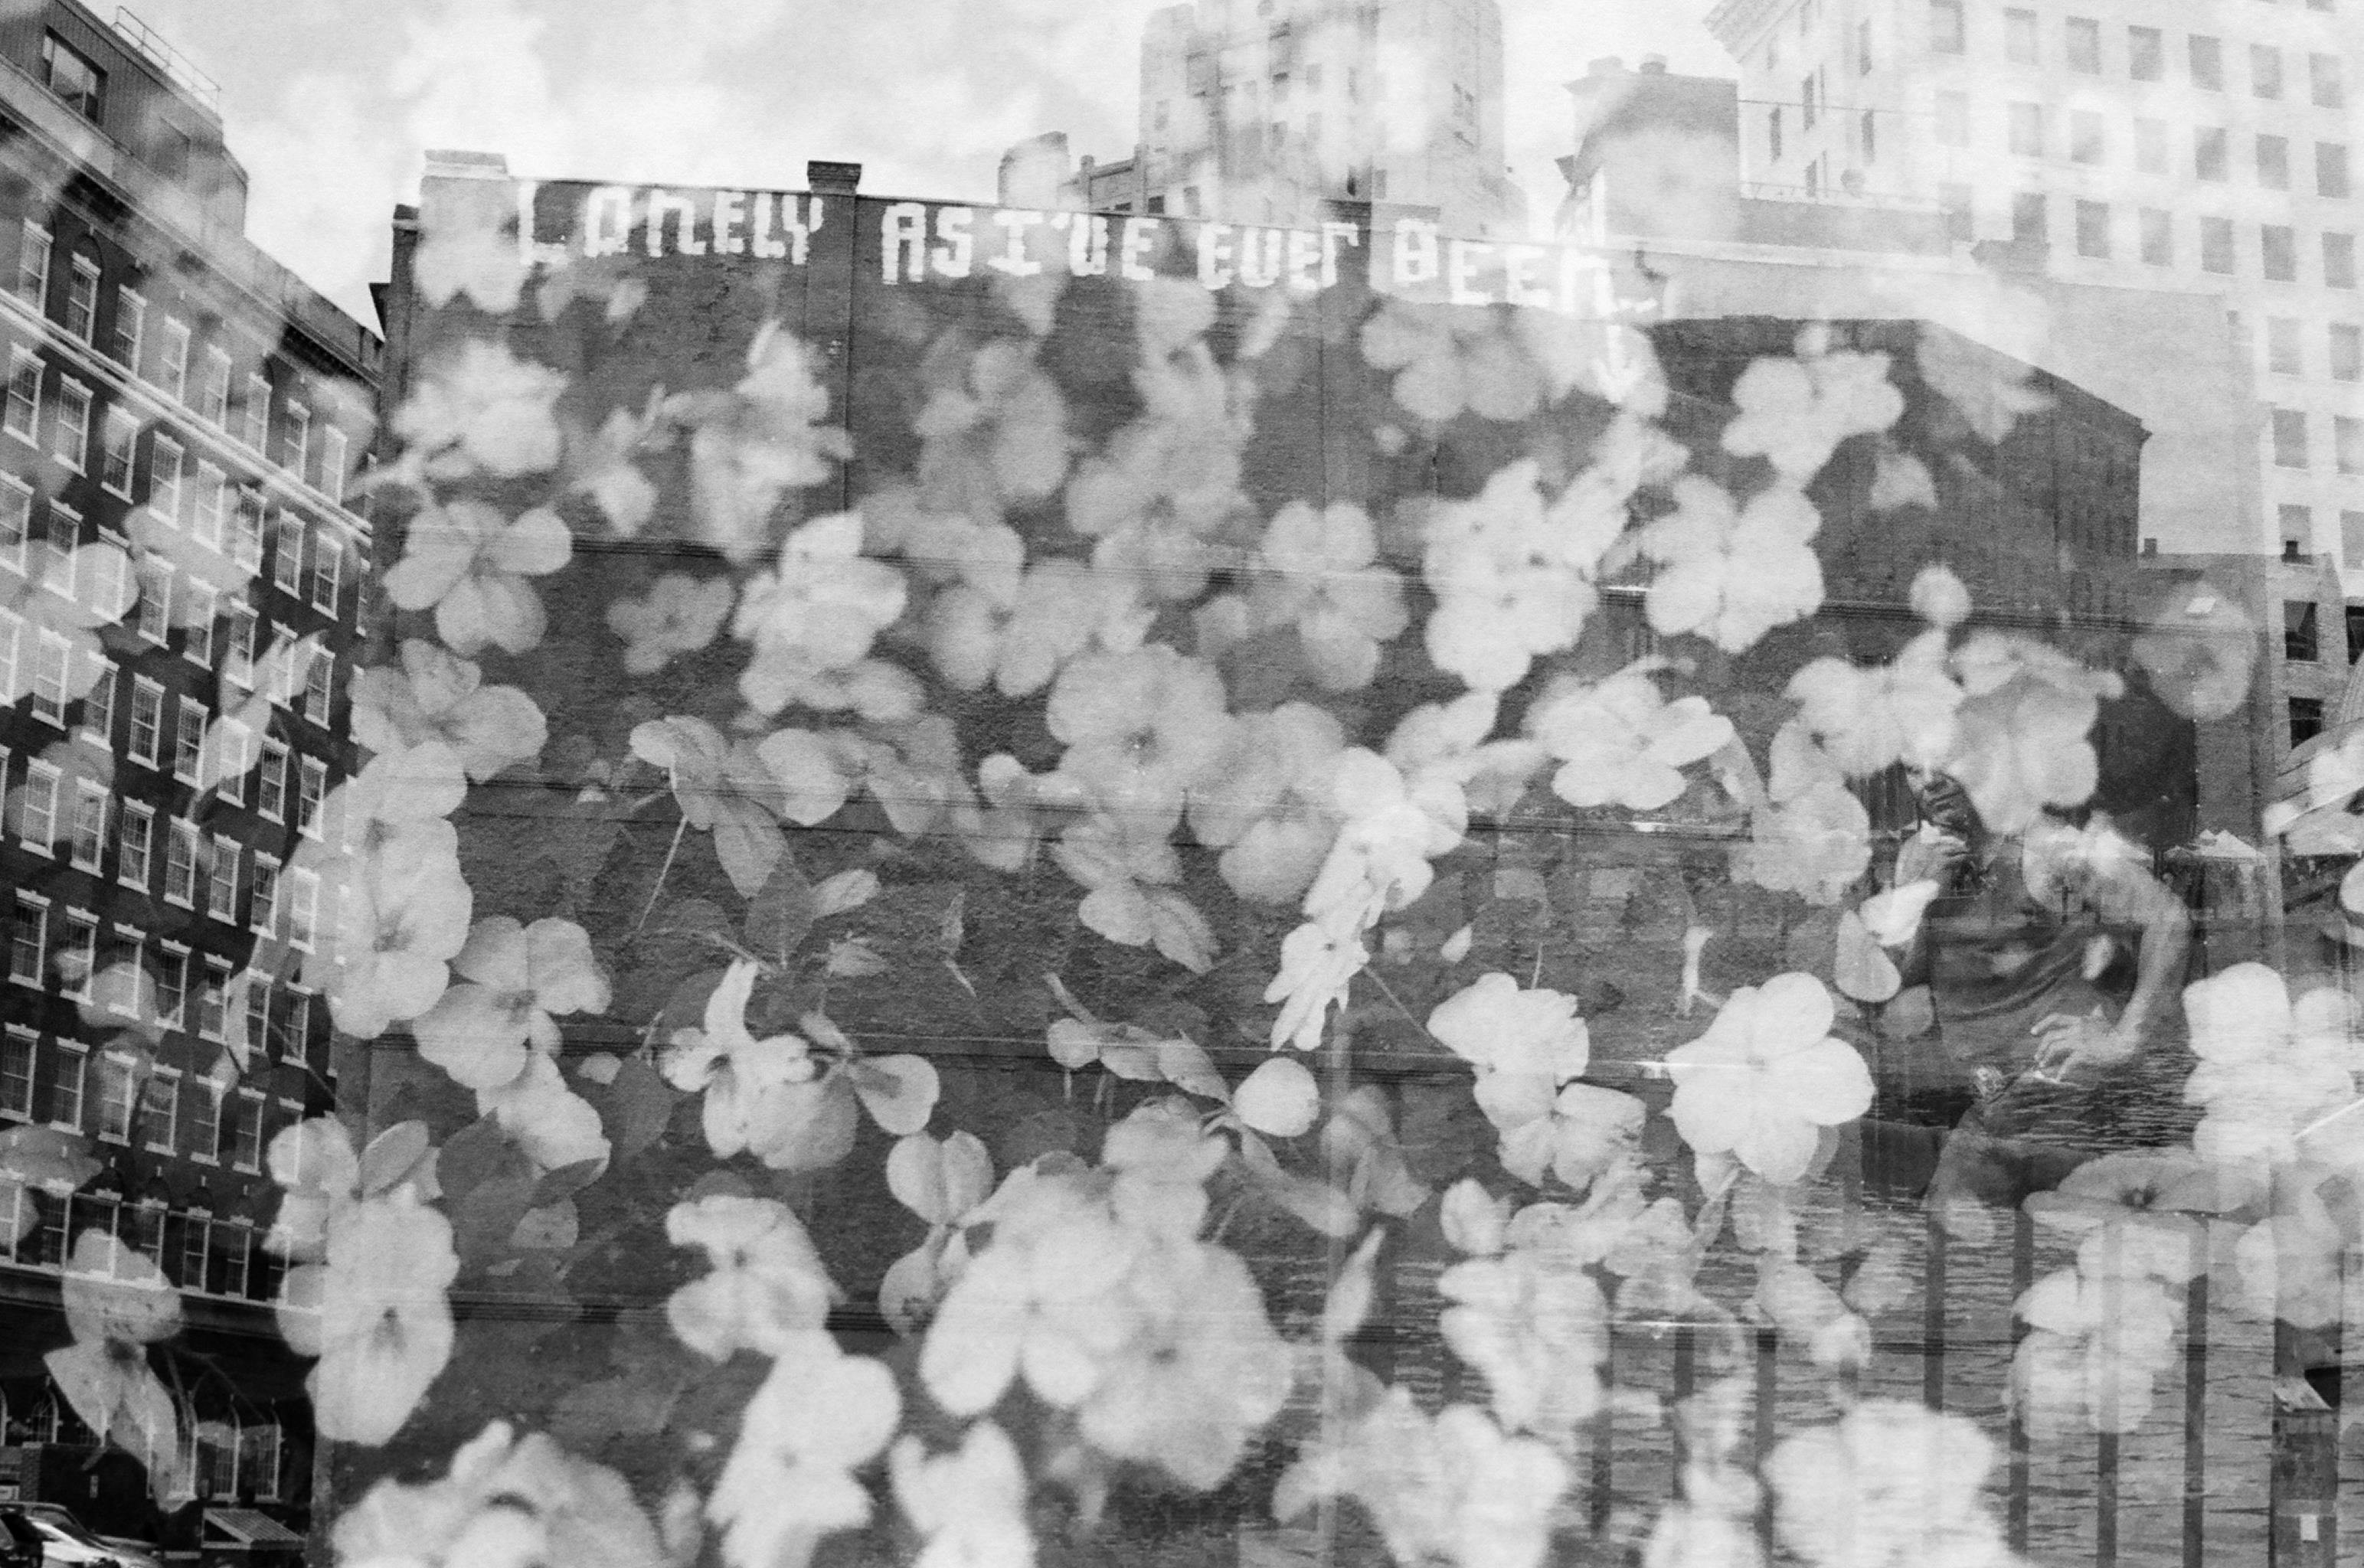 A double exposure film photo of the 'Loney as I'll ever be' grafitti in Providence, RI, with white petunias overlaid